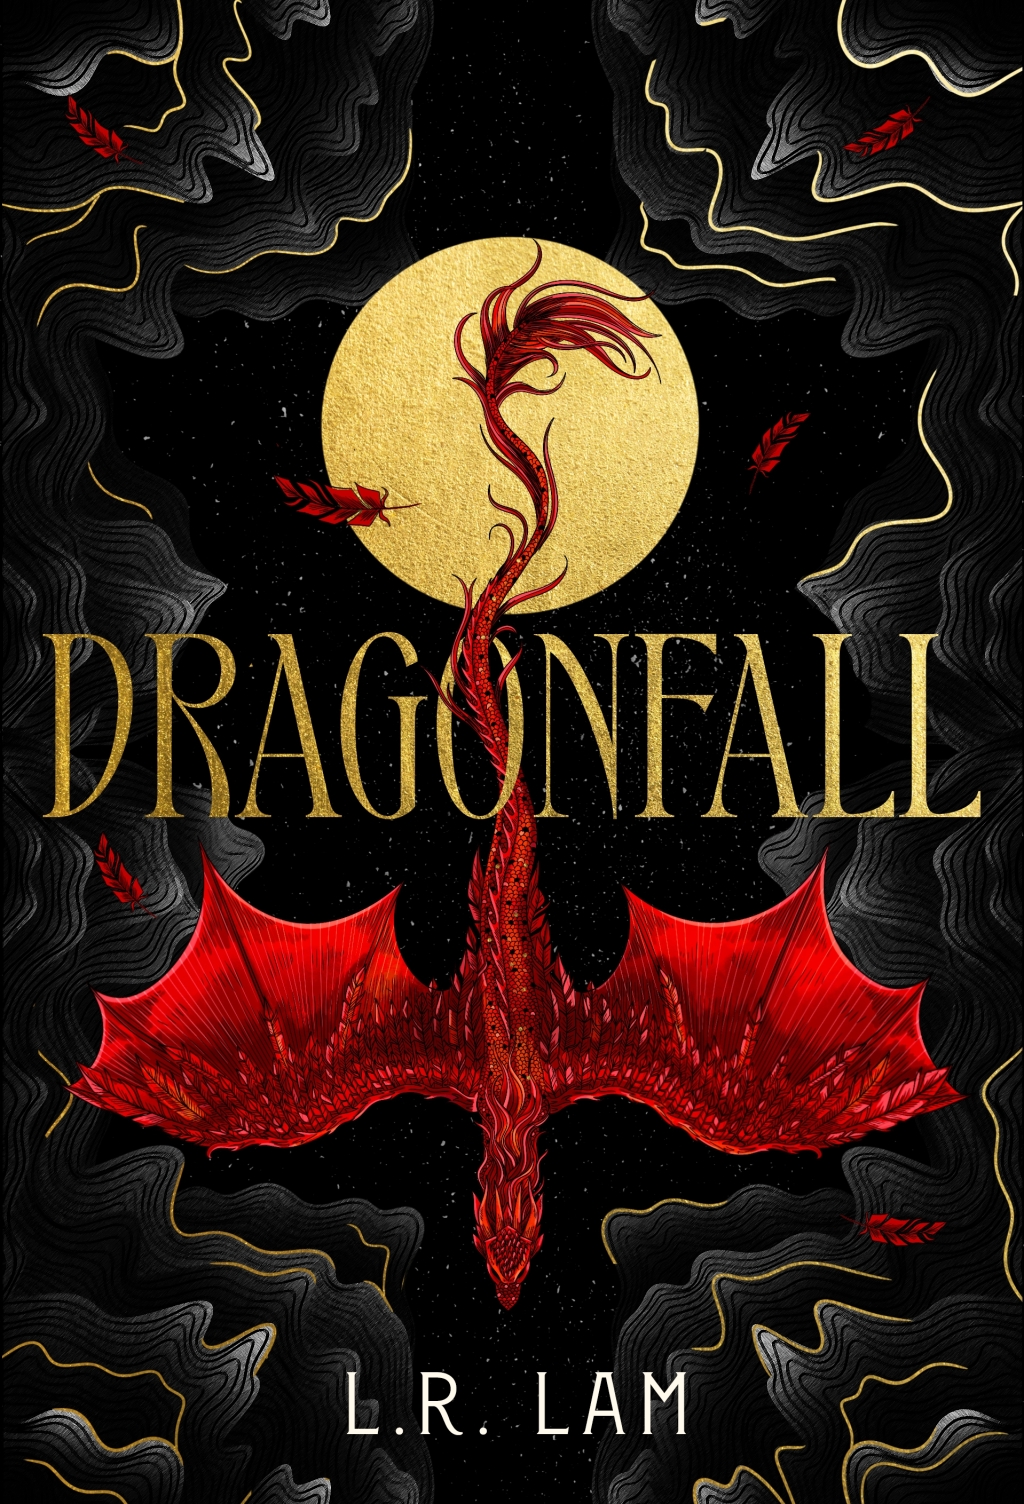 Book Review: Dragonfall by L.R. Lam (fantasy)